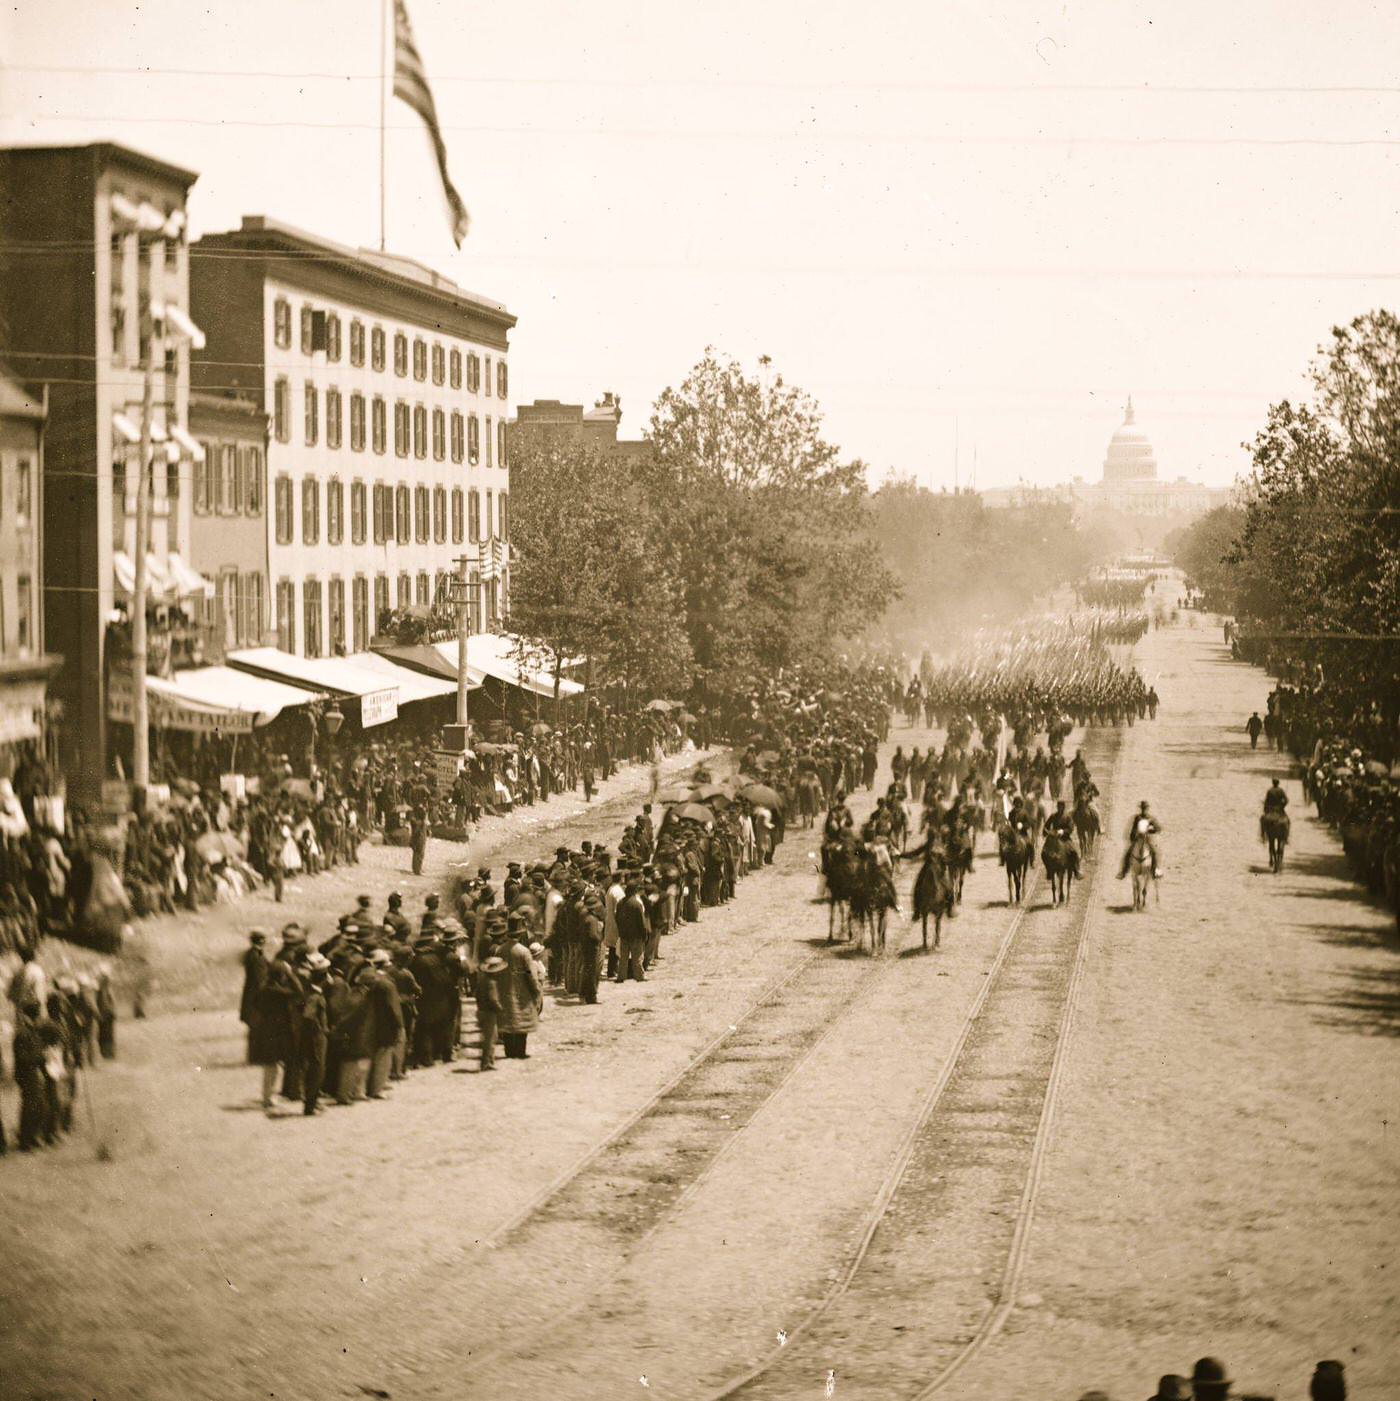 The Grand Review of the Army passing on Pennsylvania Avenue, Washington, D.C., 1865